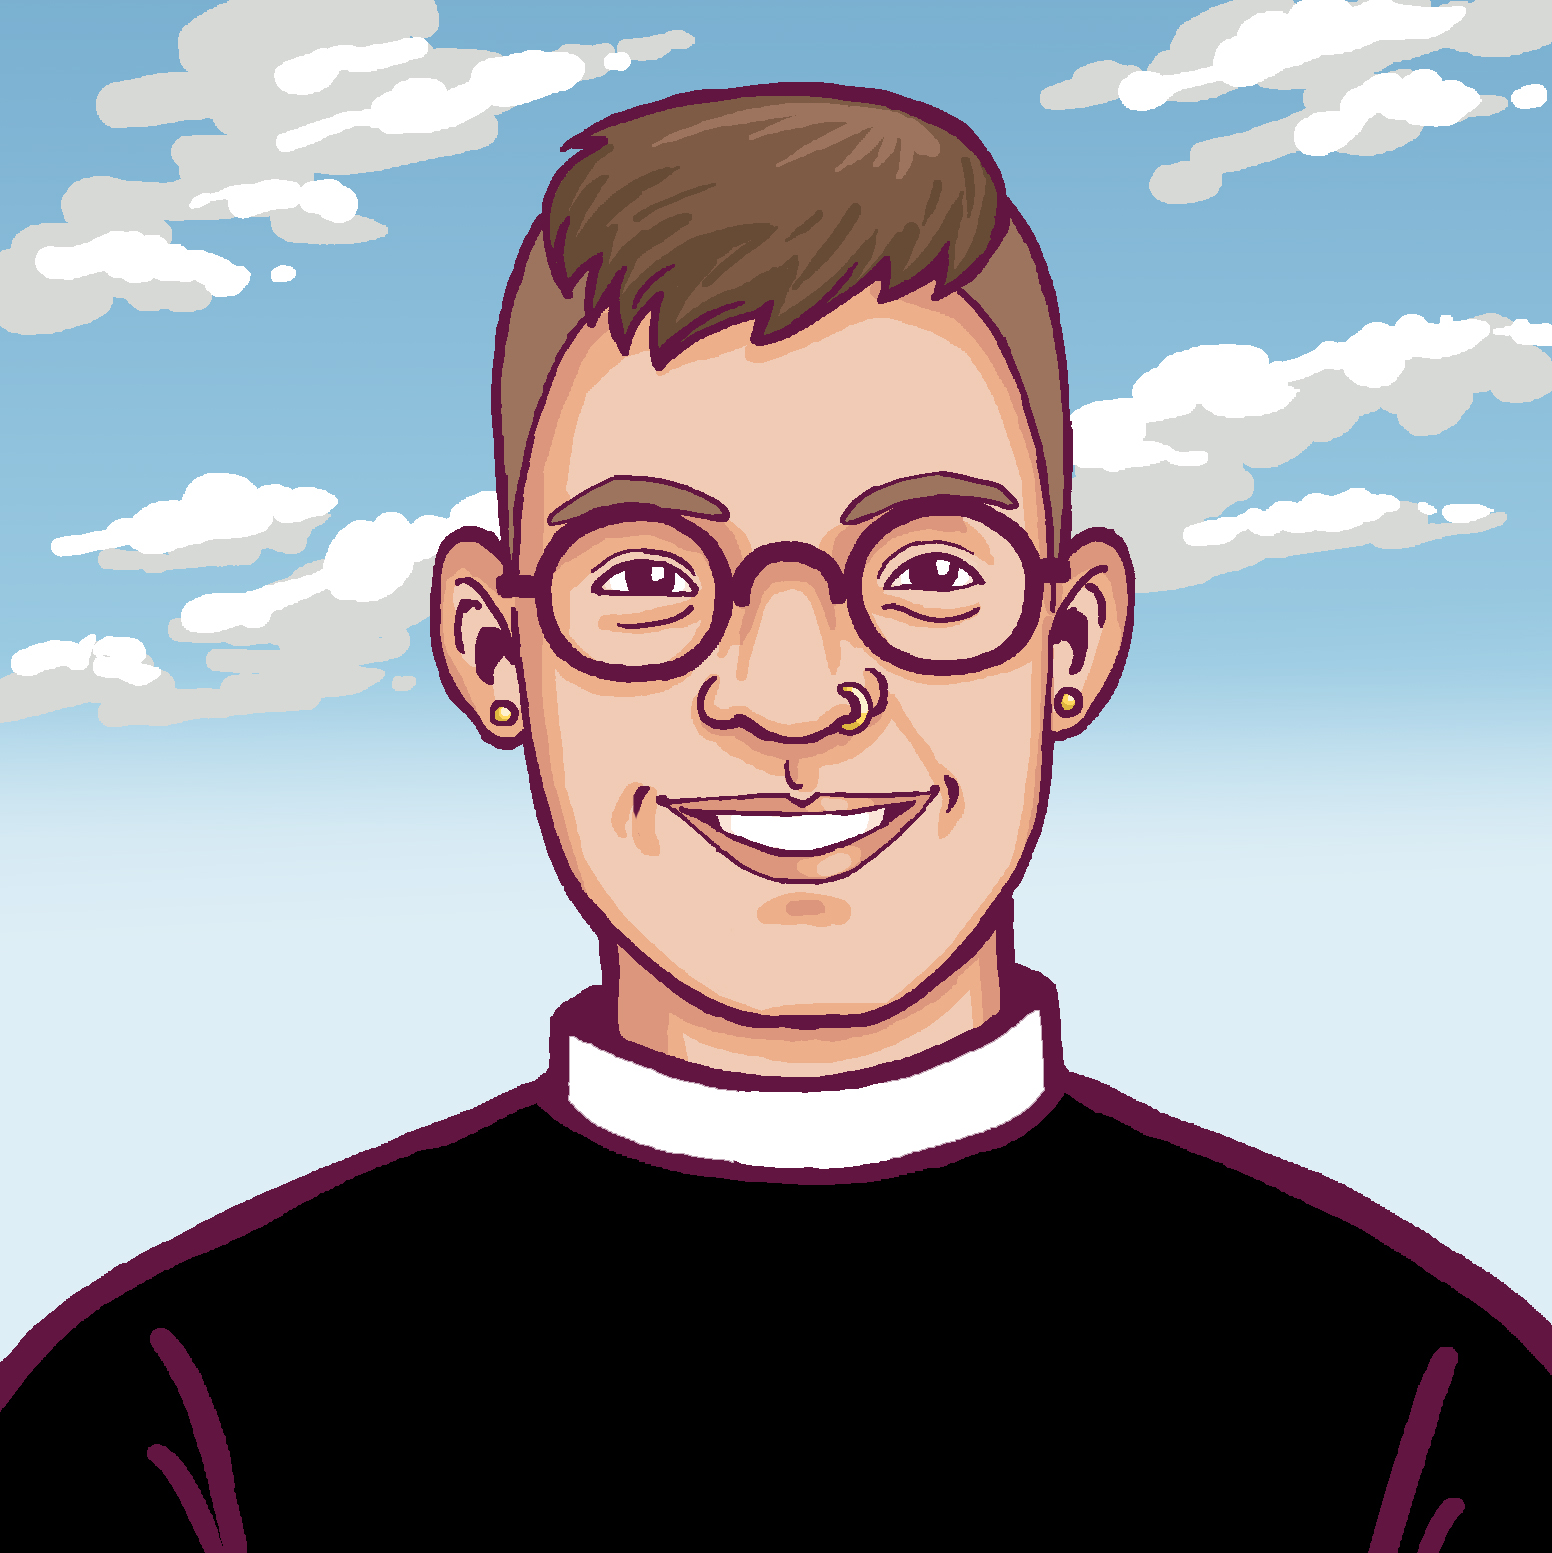 A cartoon of Flourish Klink, a white person wearing round glasses and a clergy shirt with a round collar.